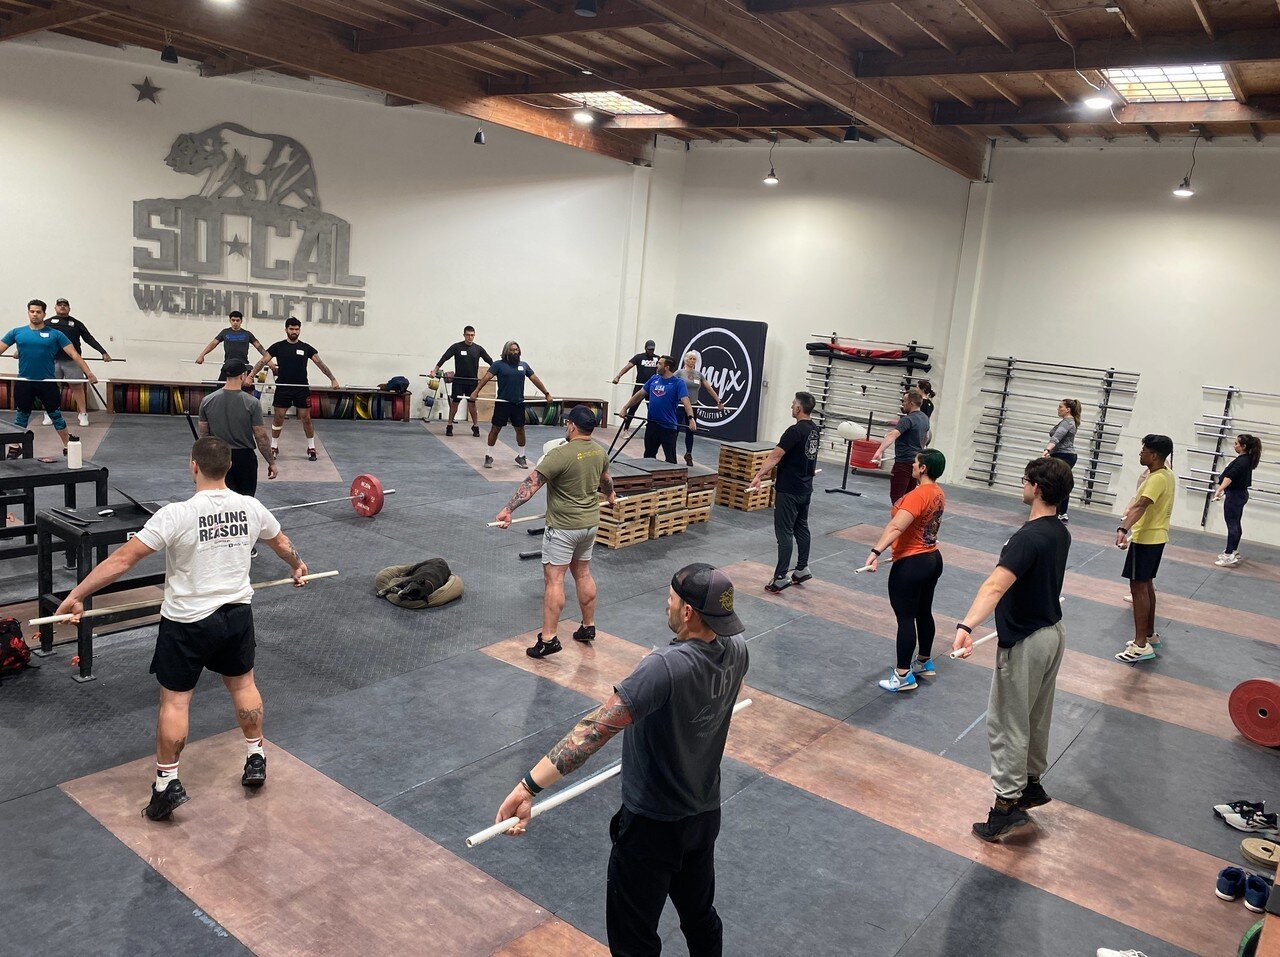 Love the idea of being a weightlifting coach or furthering your weightlifting education? Join us June 10-11 for our USAW L1 and get certified as a weightlifting coach!⁠
⁠
What you get:⁠
&middot; 13 hours of education and drills on weightlifting⁠
&mid